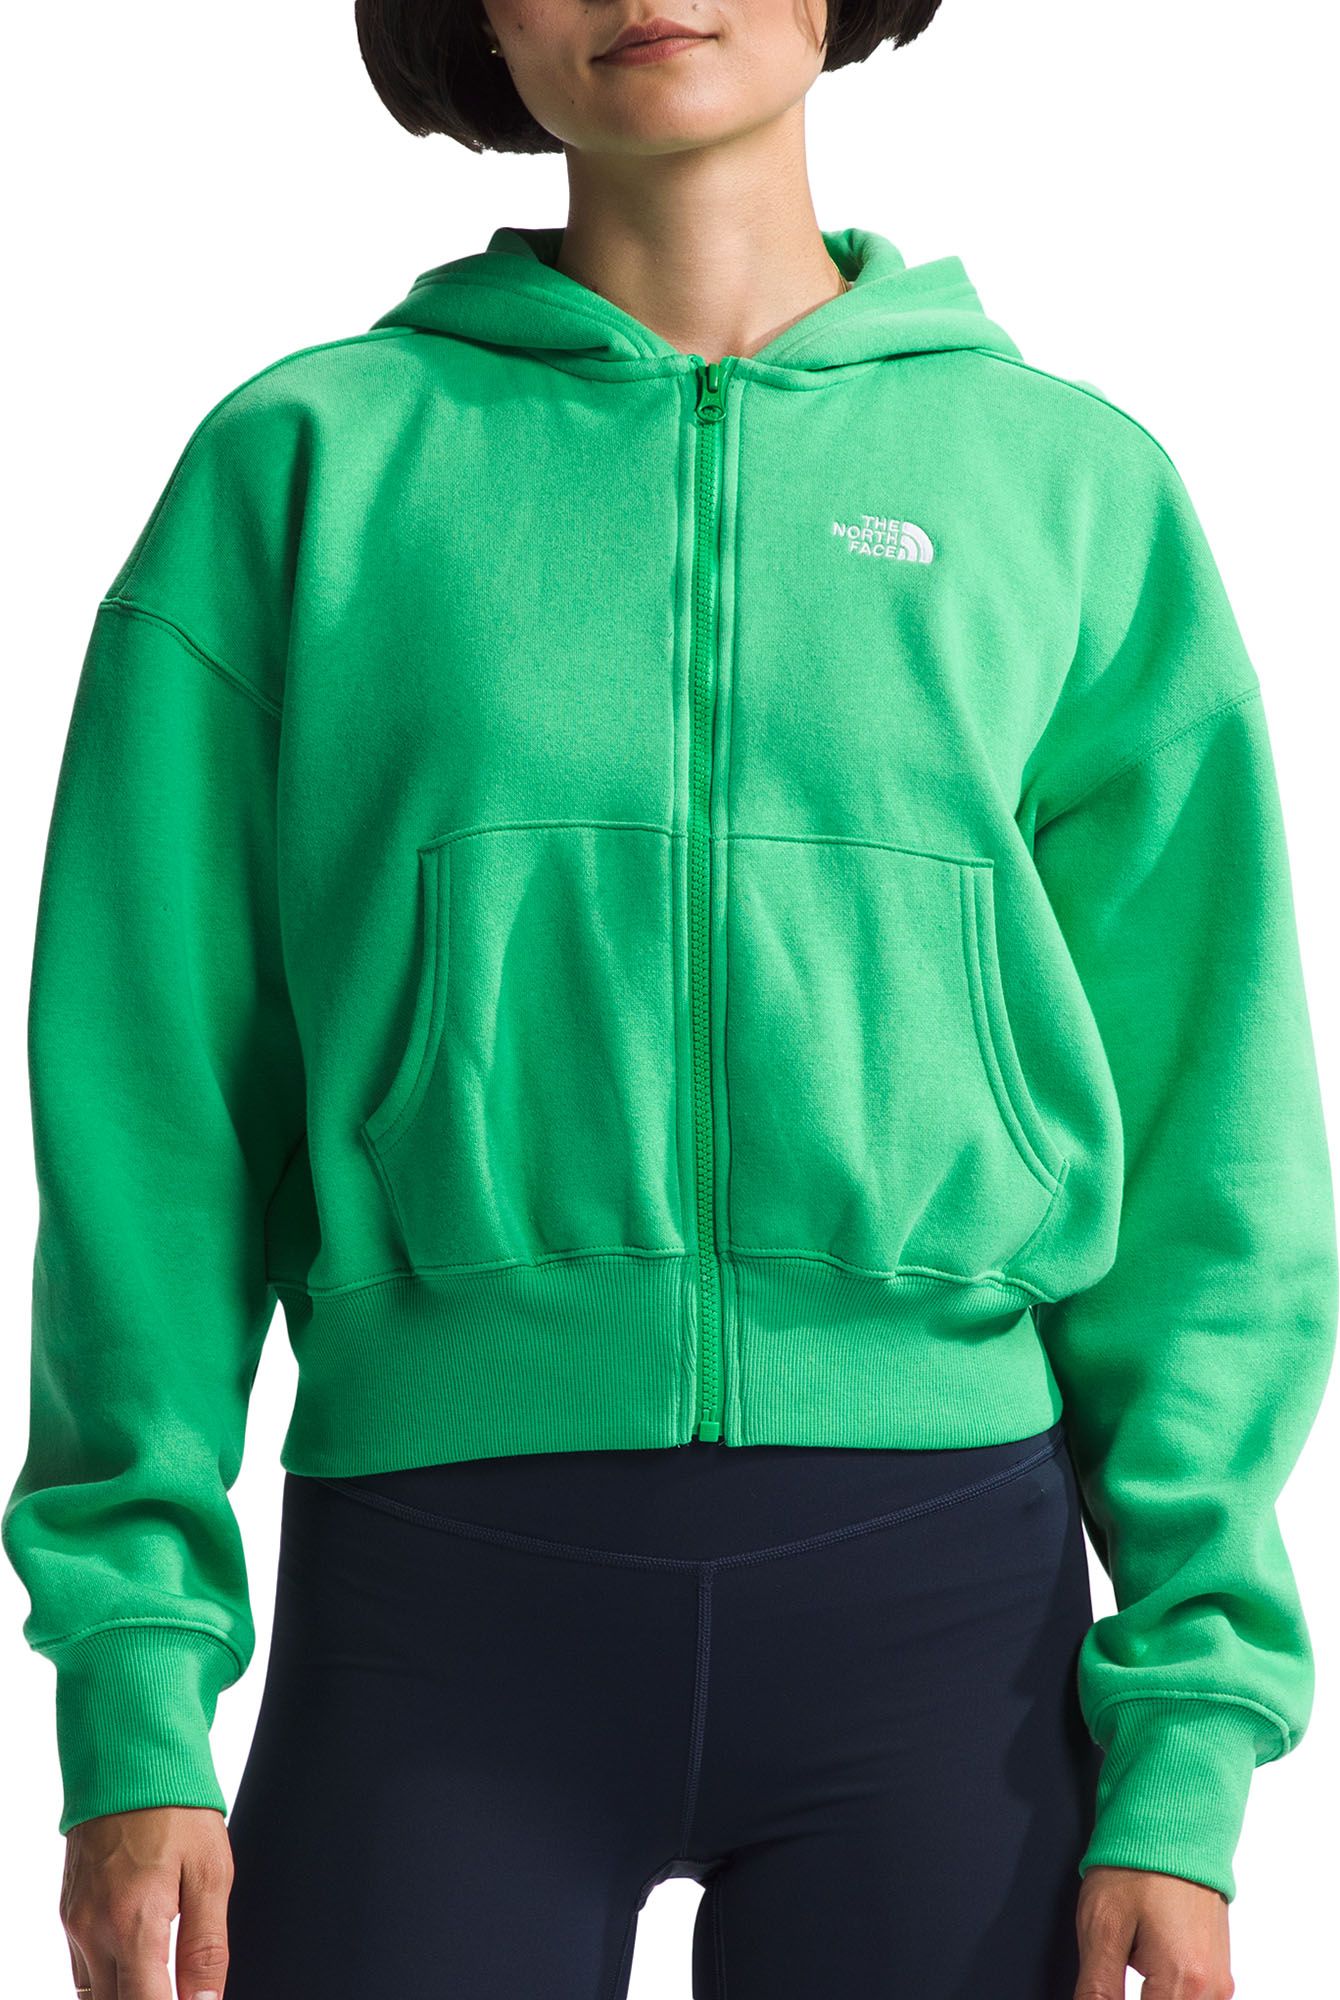 The North Face Women's Evolution Full-Zip Hoodie | Dick's Sporting Goods